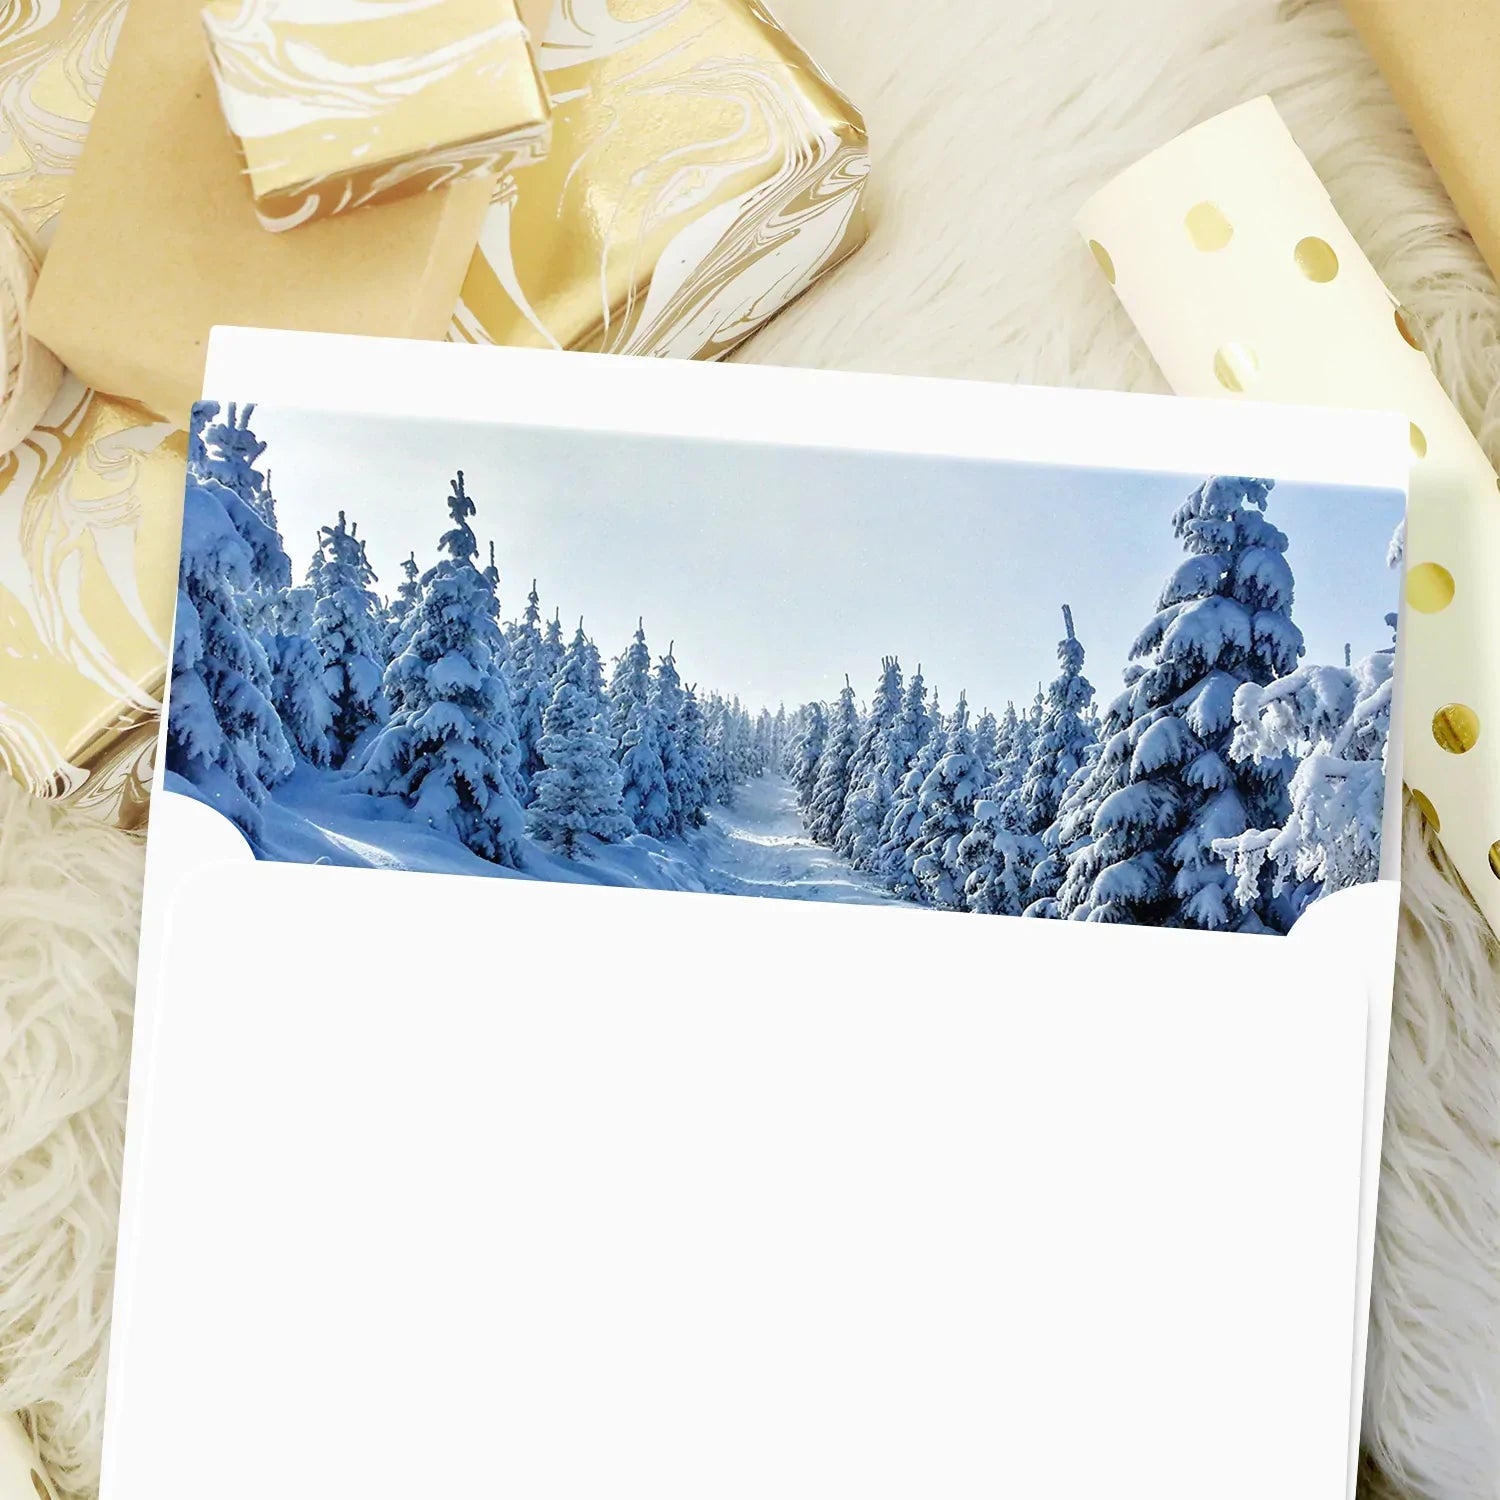 Happy Holiday Trees and Snow Cards & Envelopes - 25 Cards & 25 Envelopes per Pack (HAPPY HOLIDAY SNOW) FoldCard